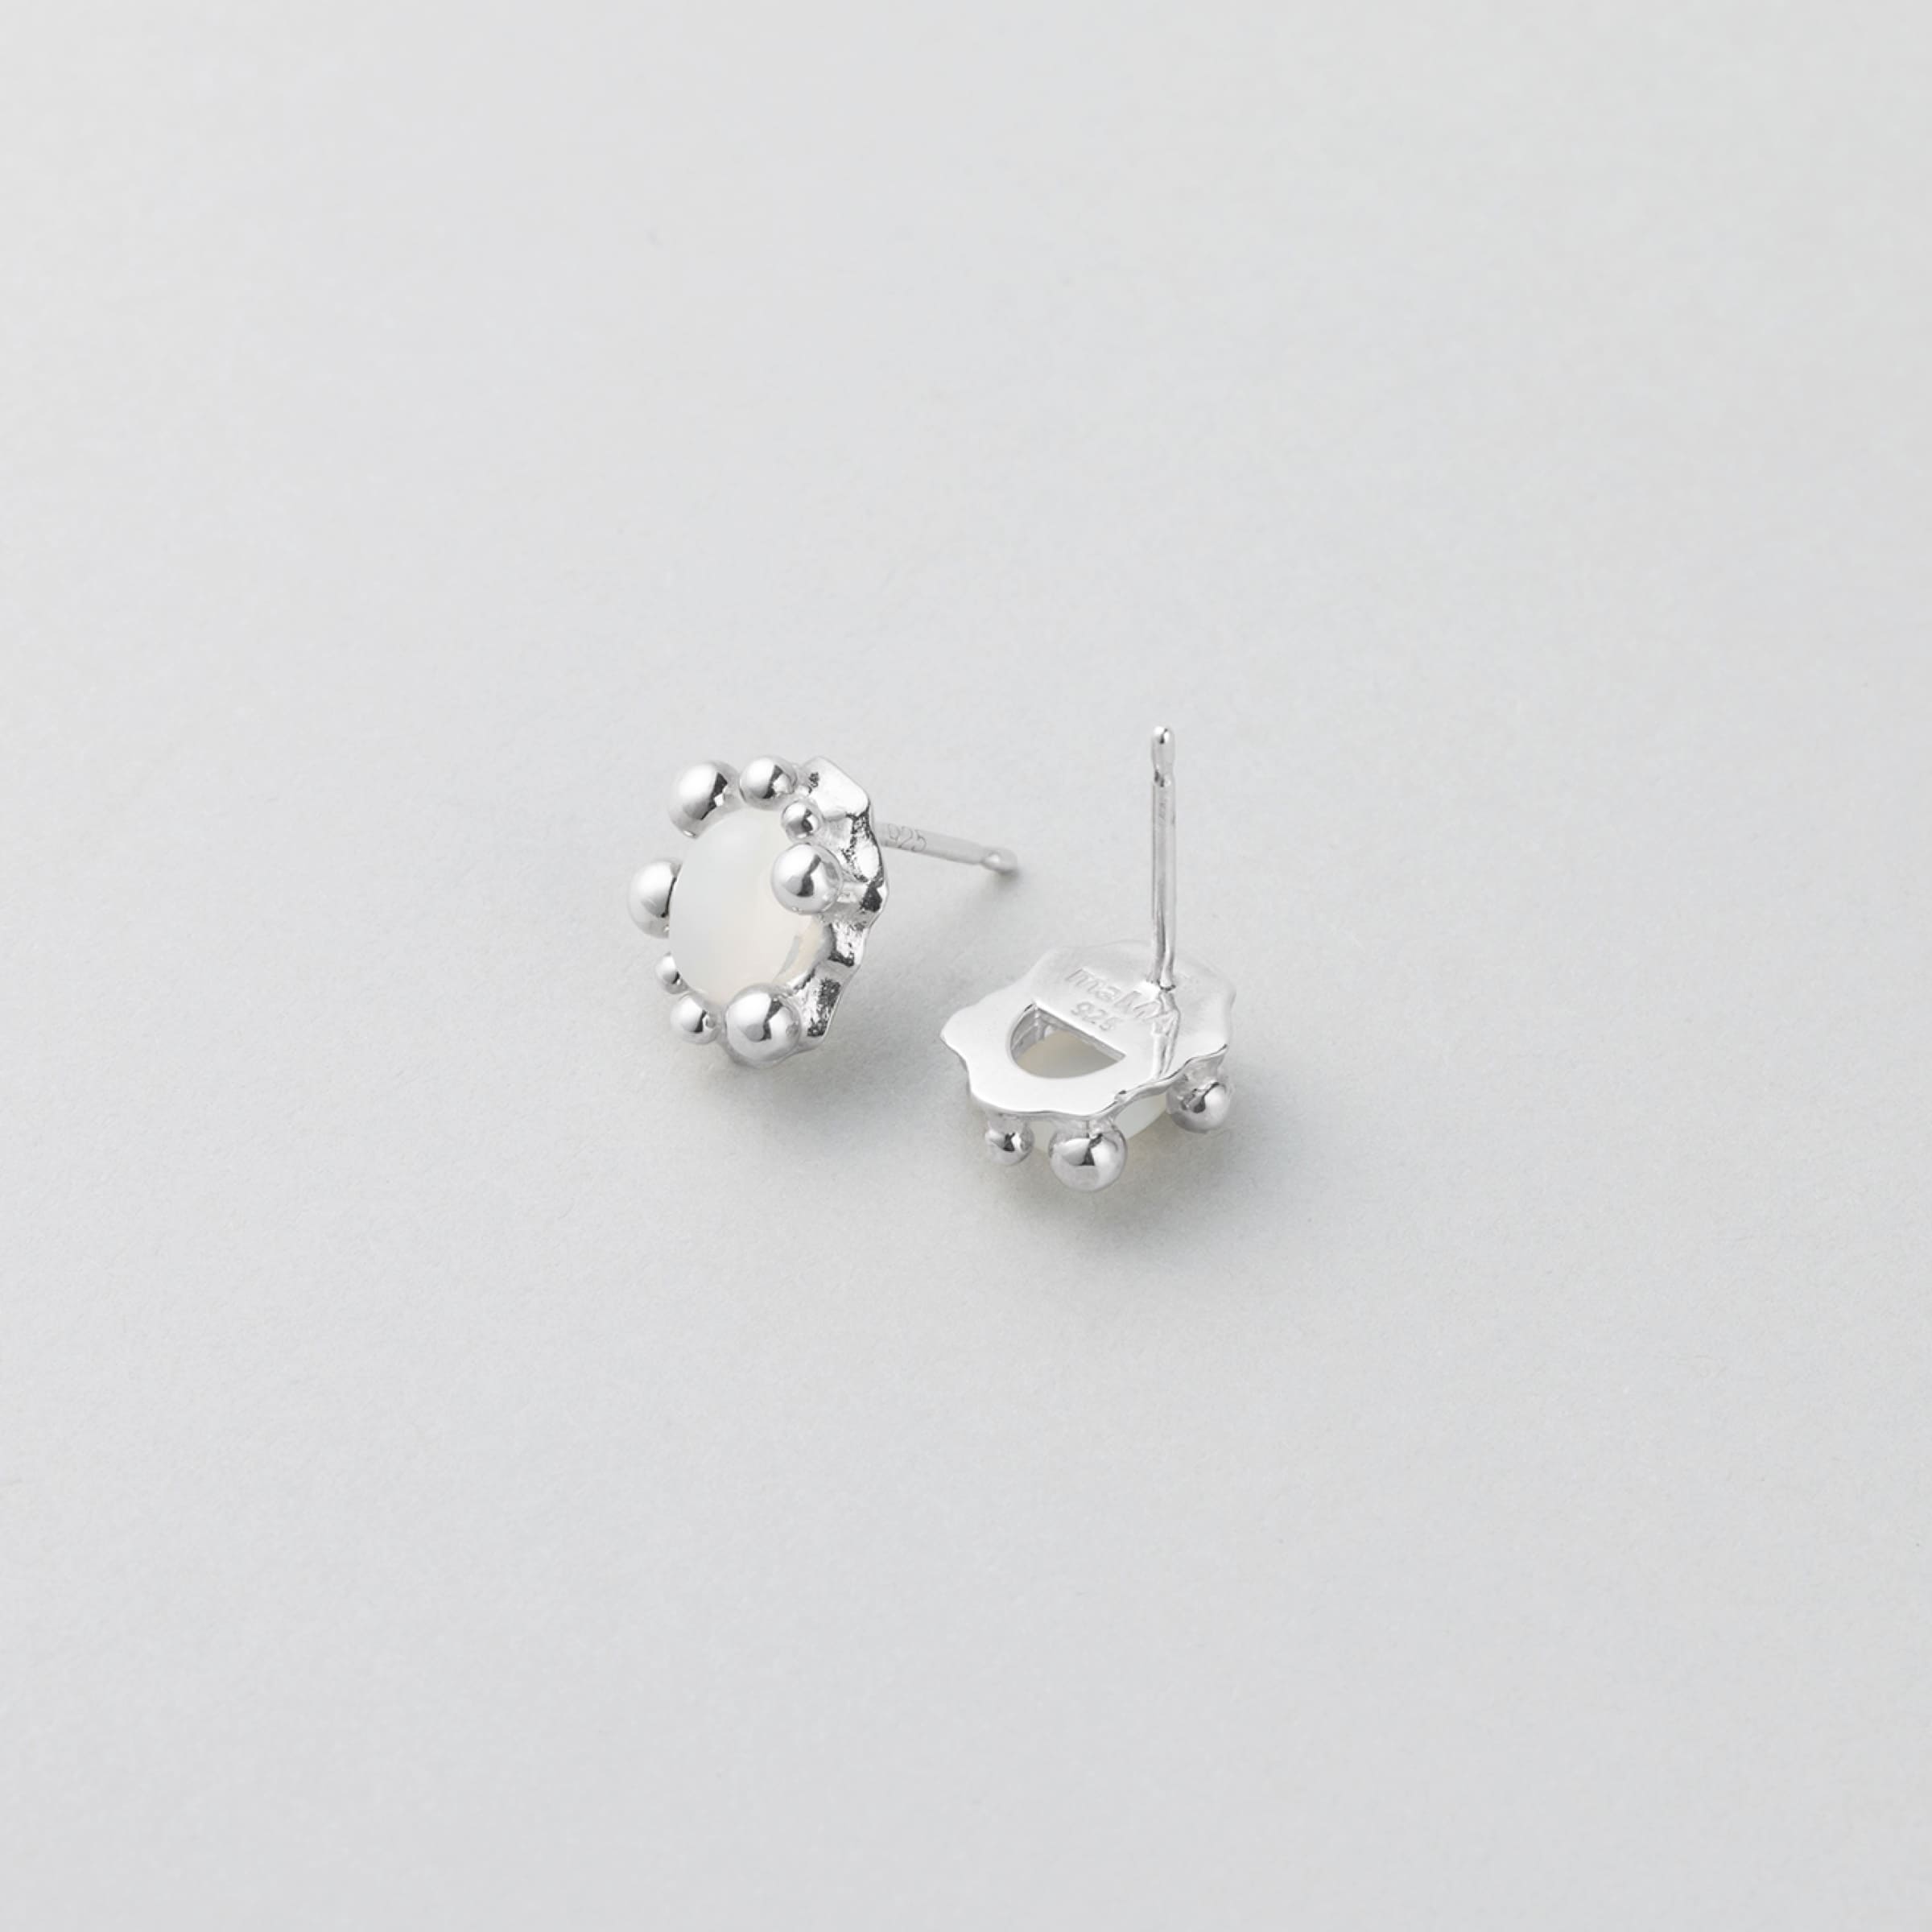 SOAPY バブル ムーンストーン シルバー ピアス / SOAPY BUBBLE MOONSTONE SILVER EARRINGS